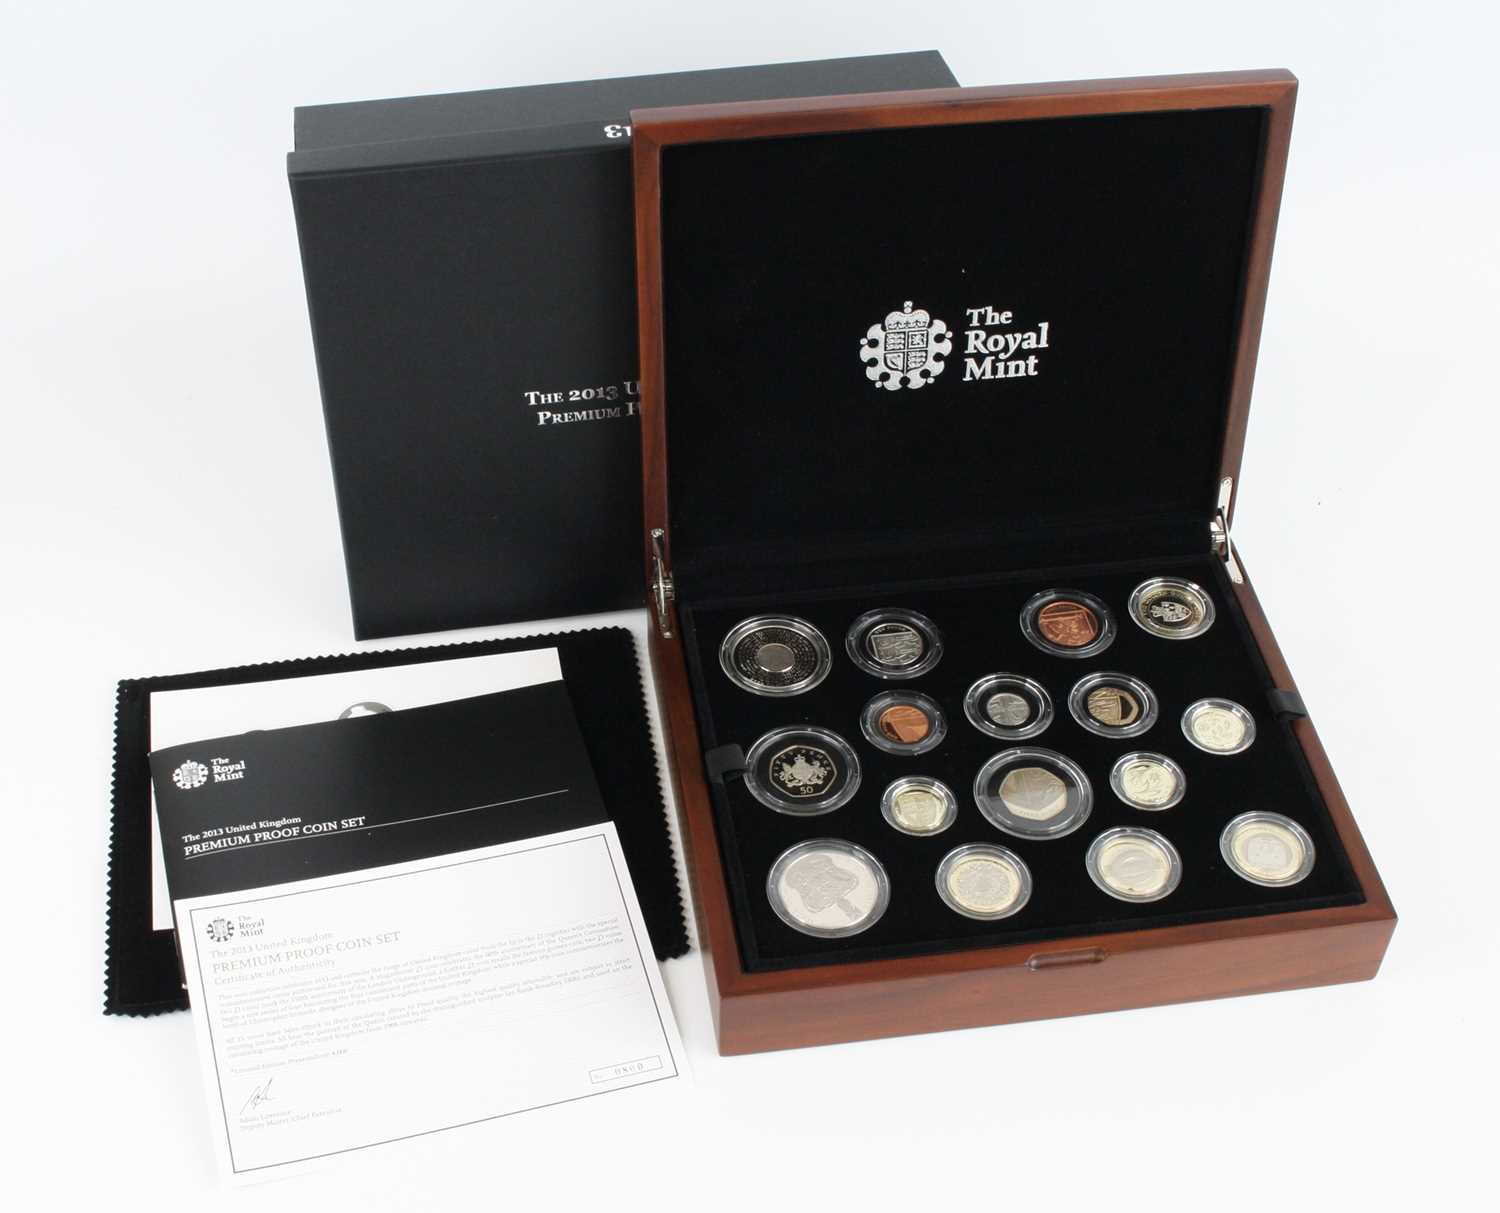 The Royal Mint, The 2013 United Kingdom Premium Proof Coin Set, a collection of fifteen proof